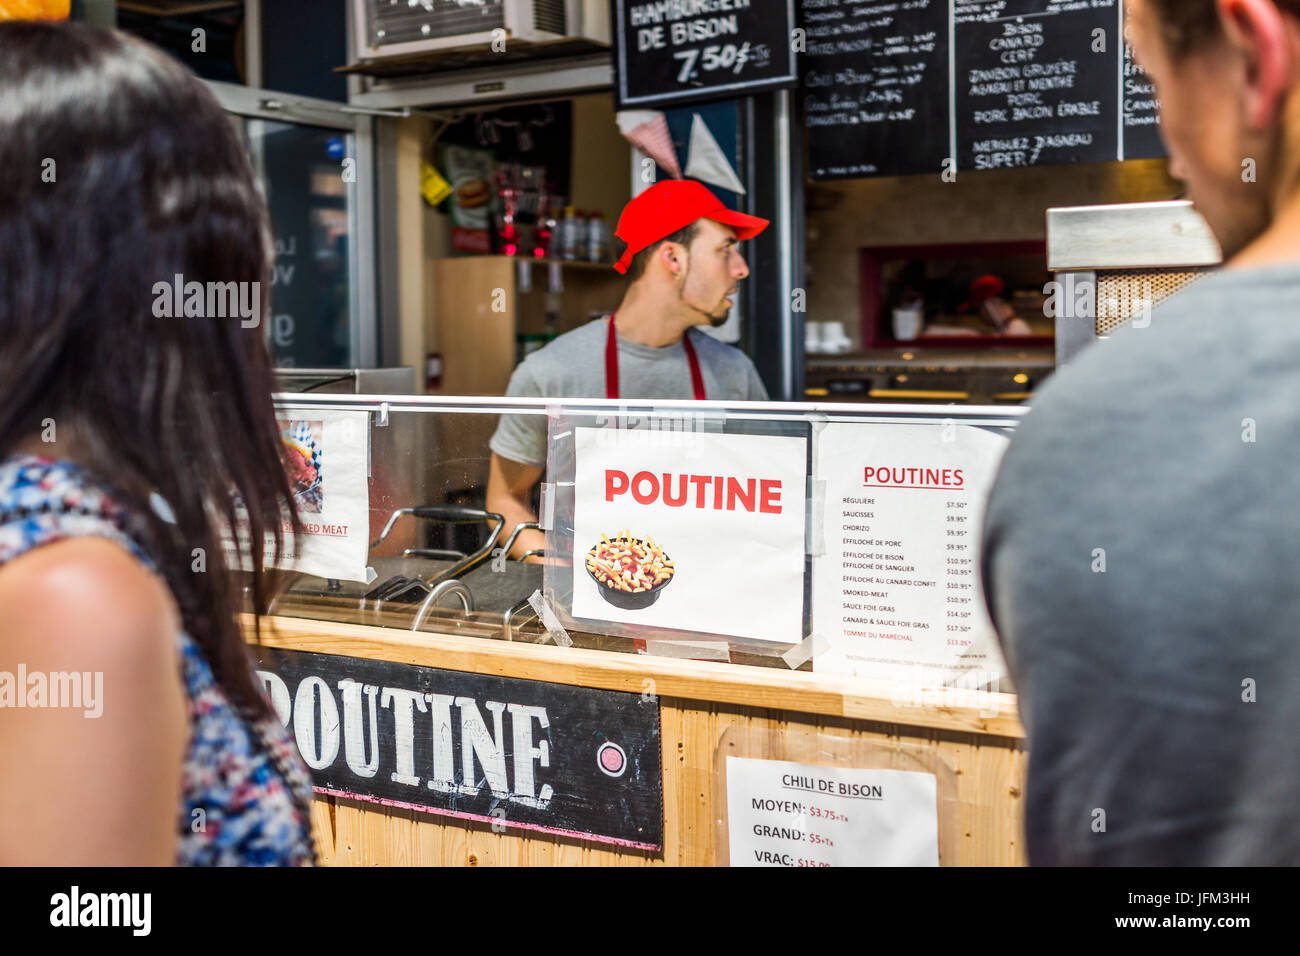 Montreal, Canada - May 28, 2017: Jean Talon market Poutine restaurant sign inside building closeup with chef in city in Quebec region Stock Photo